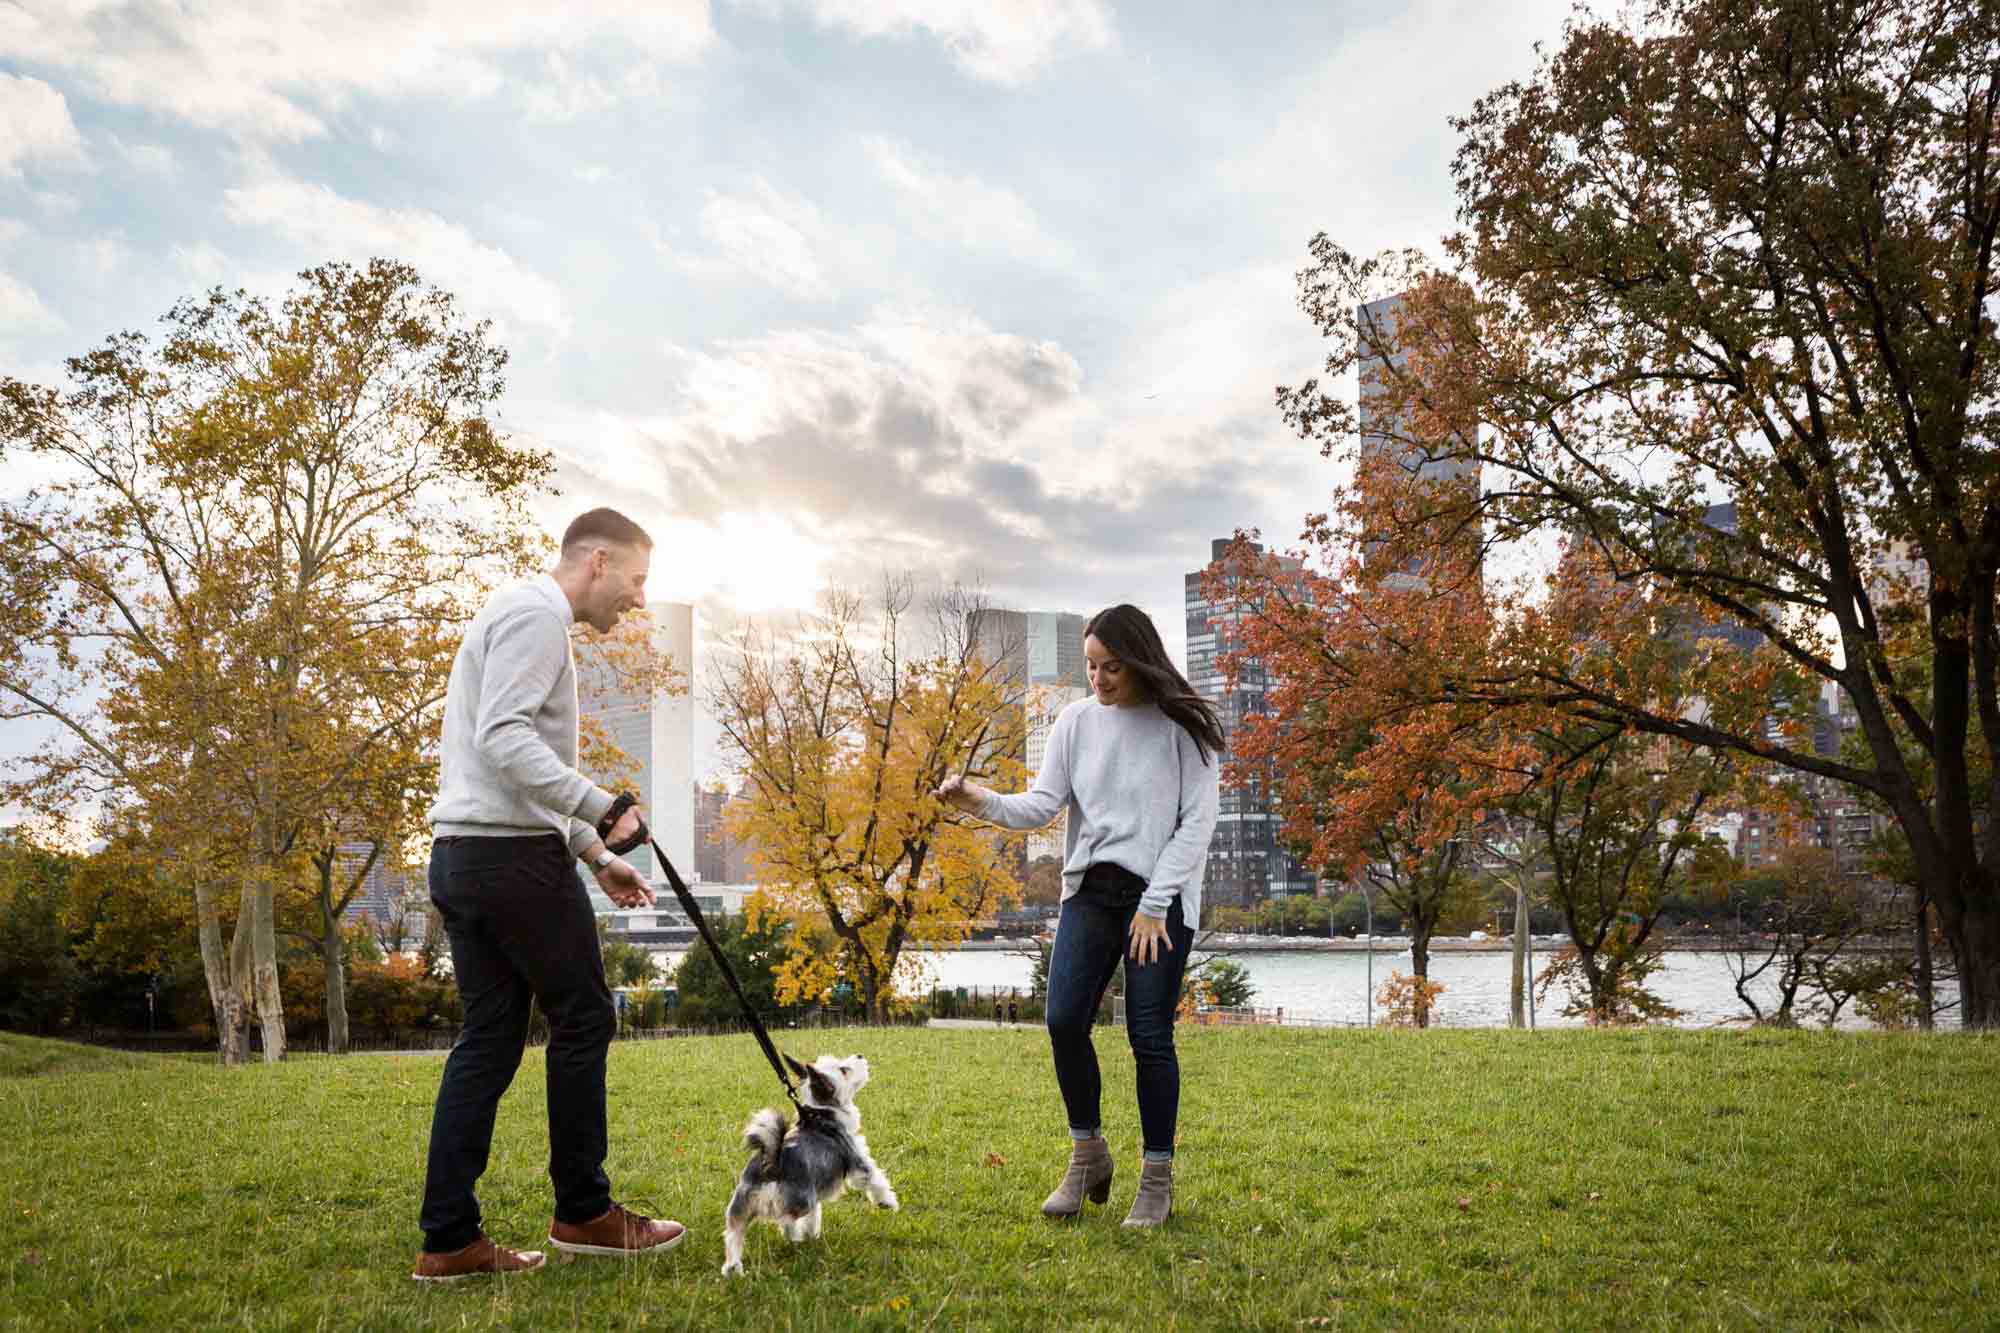 Couple playing with dog during Roosevelt Island engagement photo shoot for an article on pet engagement photo tips